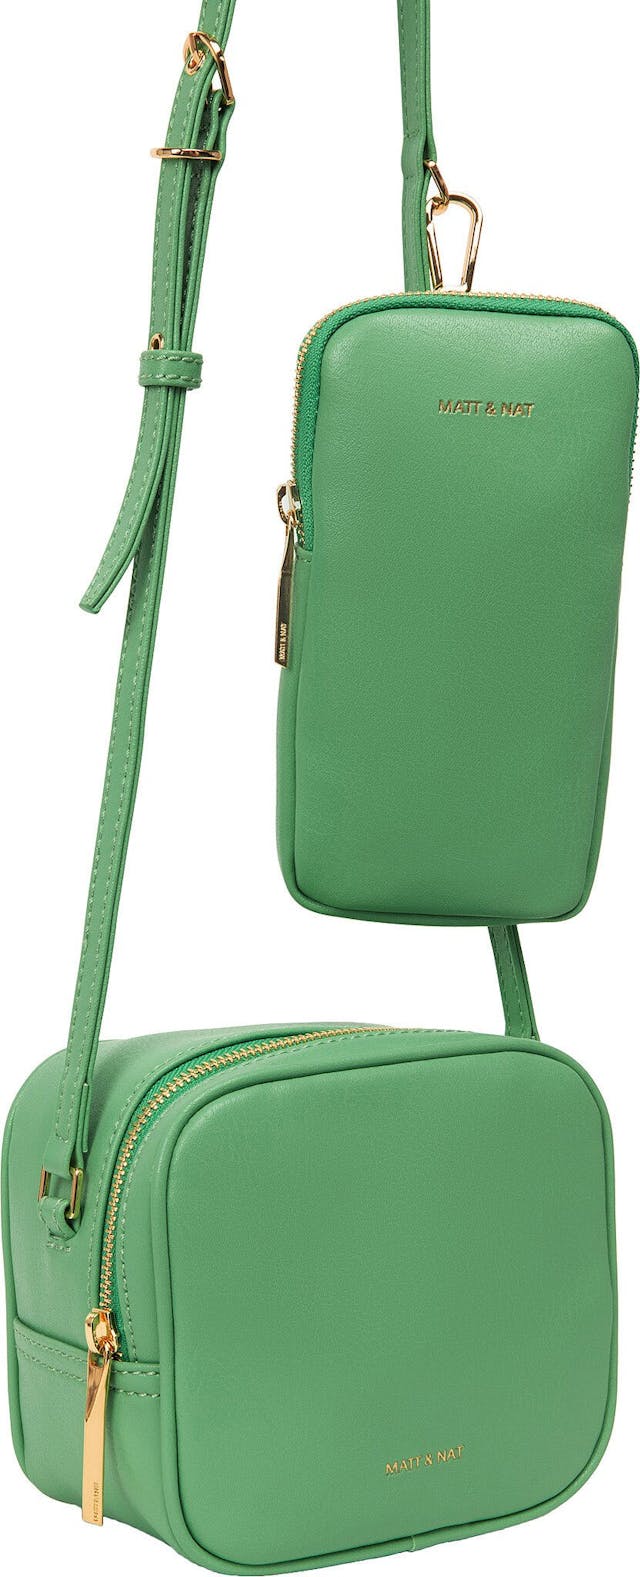 Product image for Swae Vegan Crossbody Bag 2L - Arbor Collection - Women's